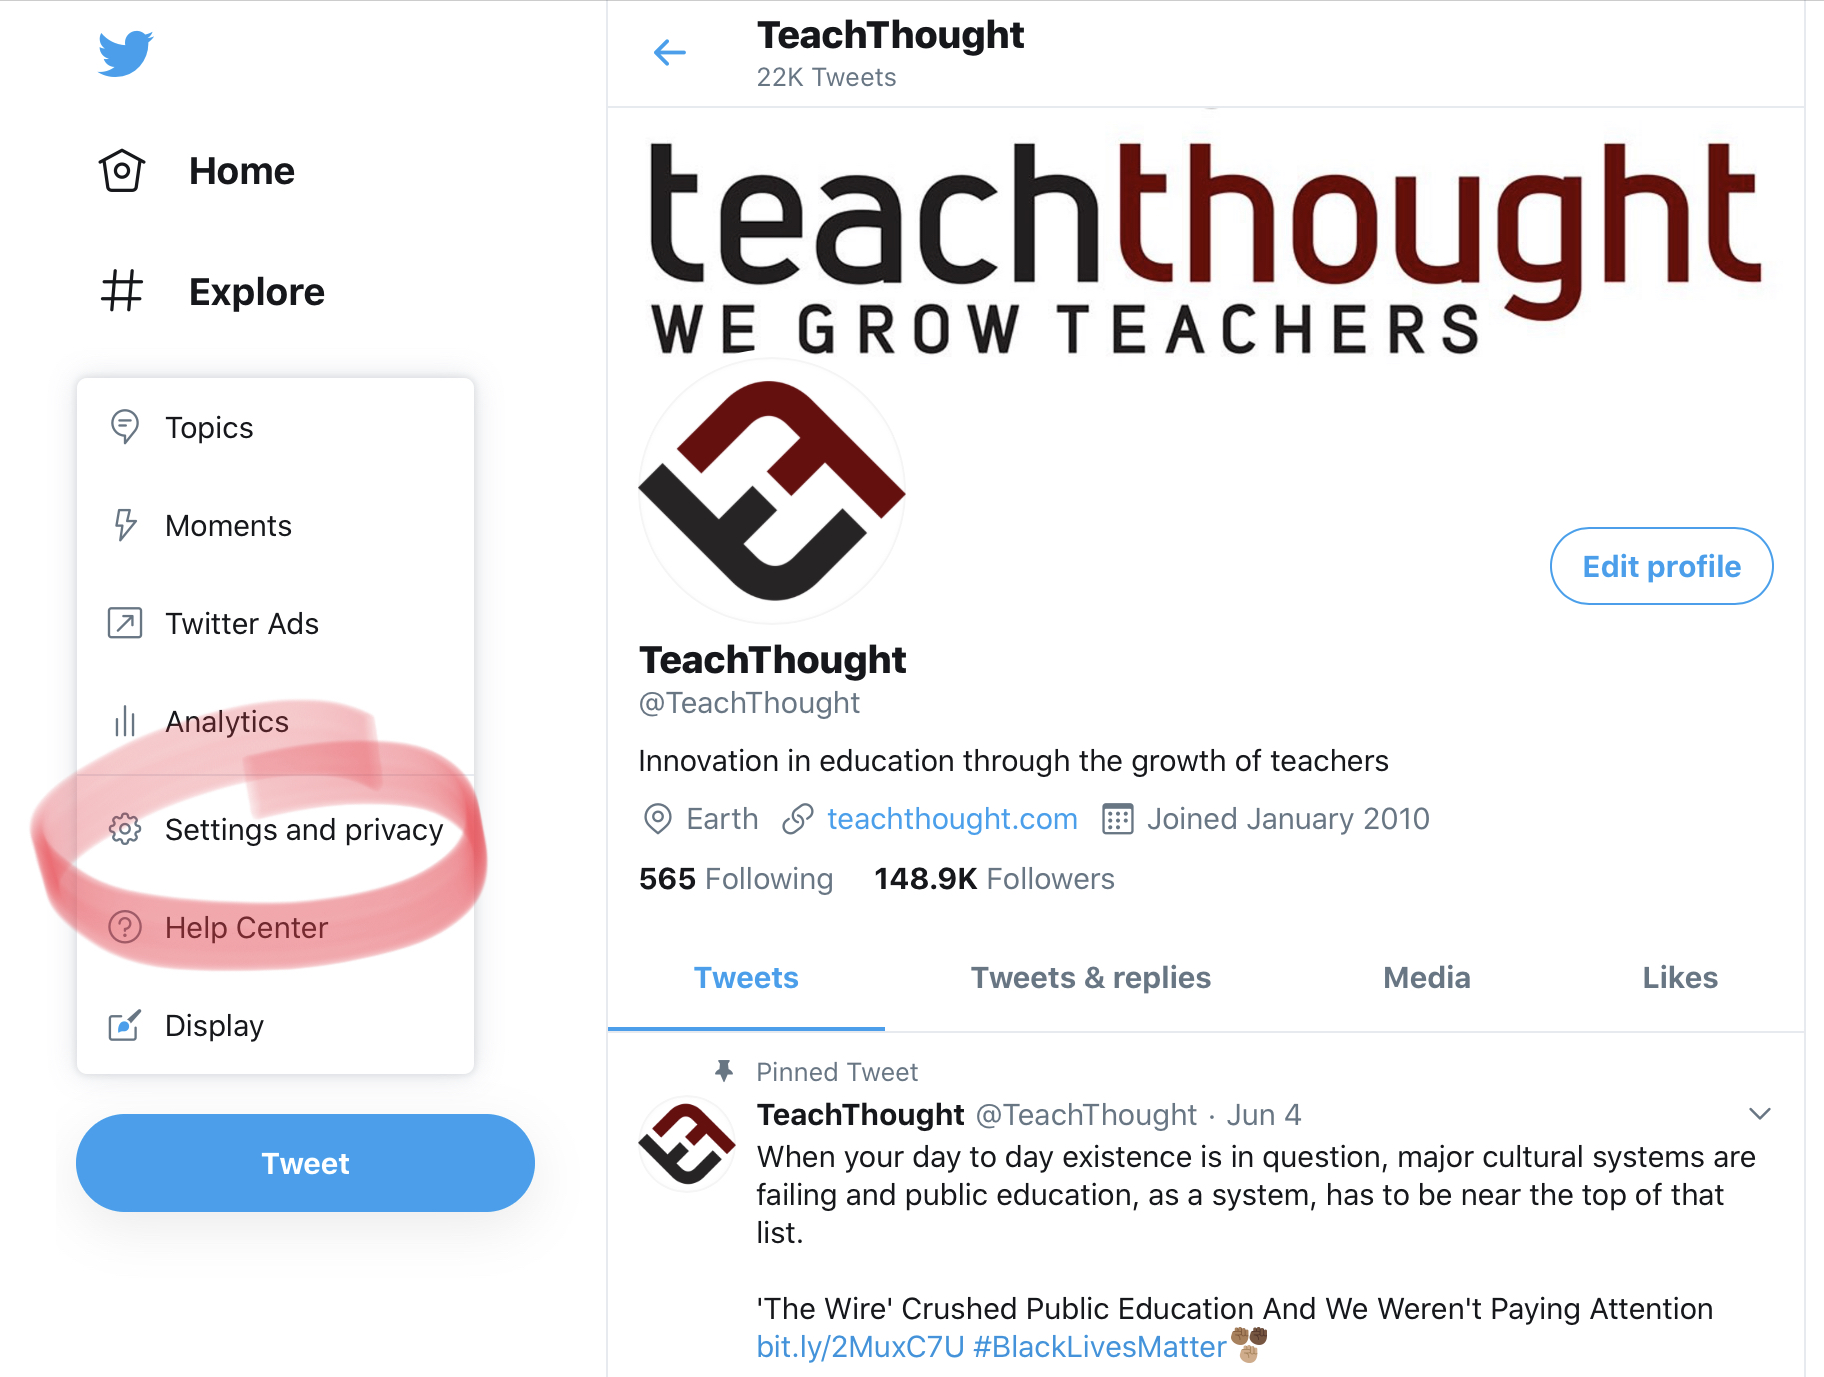 TeachThought Twitter menu settings and privacy